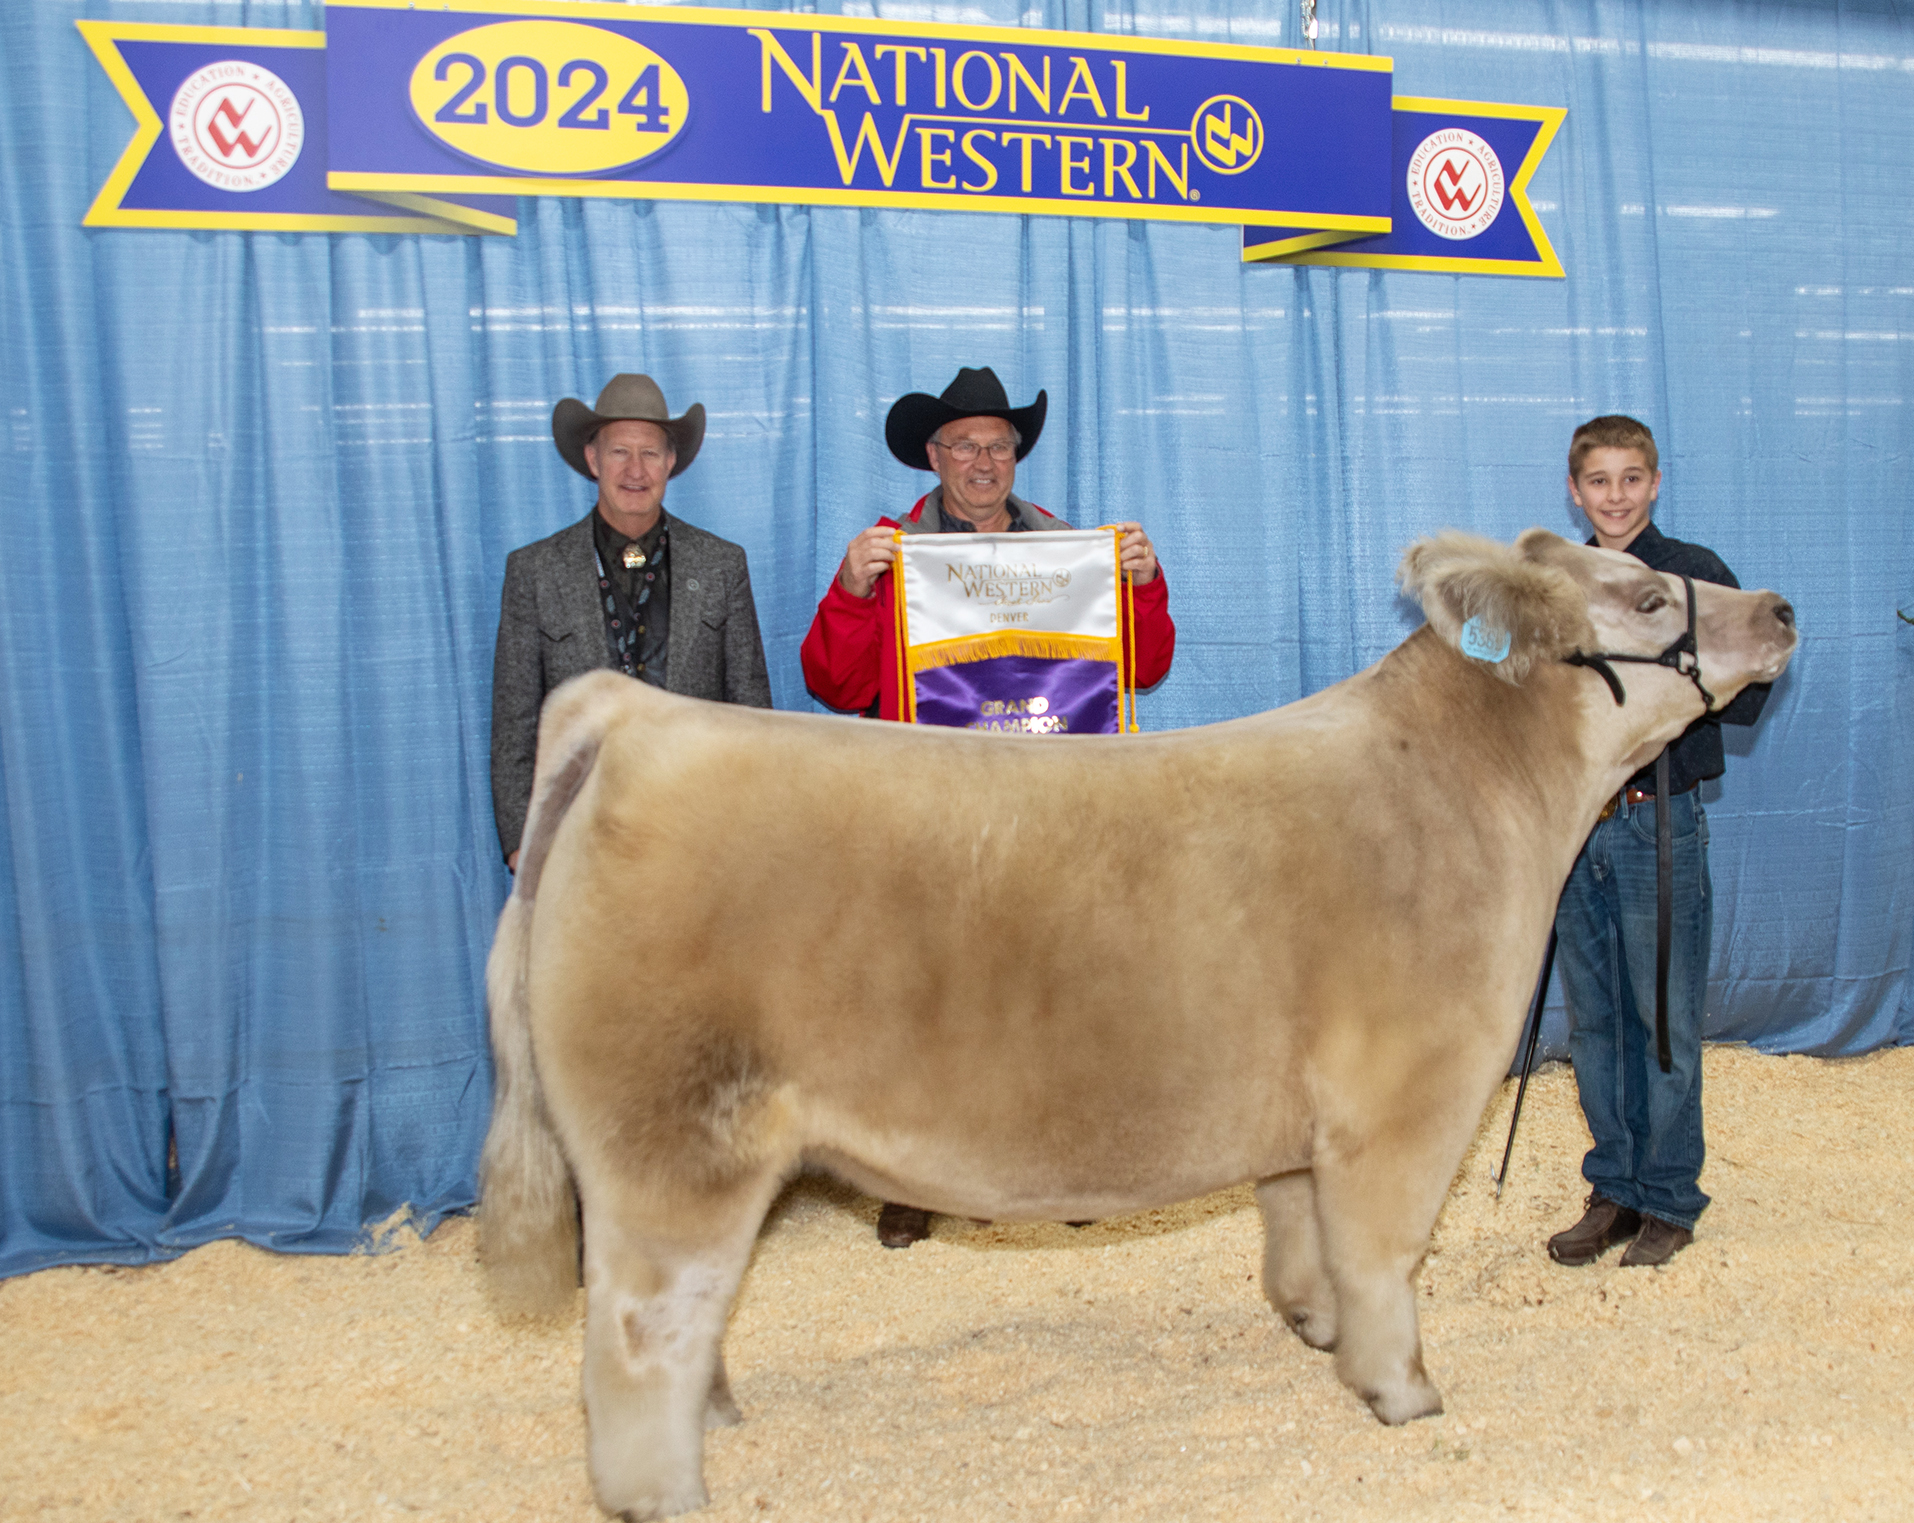 2024 Grand Champion Steer: Exhibited by Croix Reimann, sold for $185,000 to Ames Construction Company. (Photo courtesy of National Western Stock Show.)